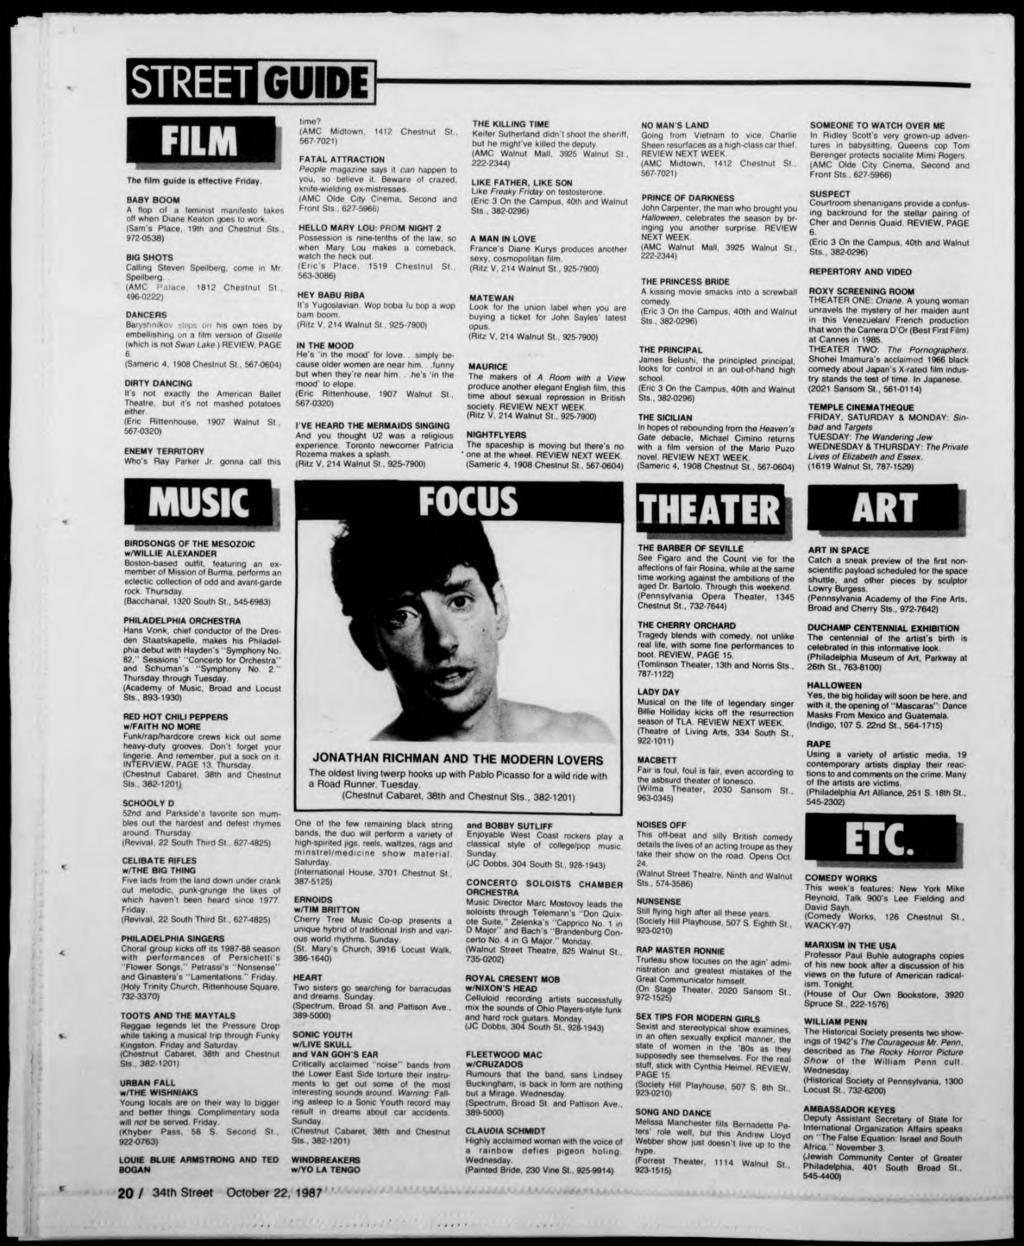 STREETHEE3 J i The film guide Is effective Friday. BABY BOOM A Hop ol a feminist manifesto lakes off when Diane Keaton goes lo work (Sam's Place, 19th and Chestnut Sts.